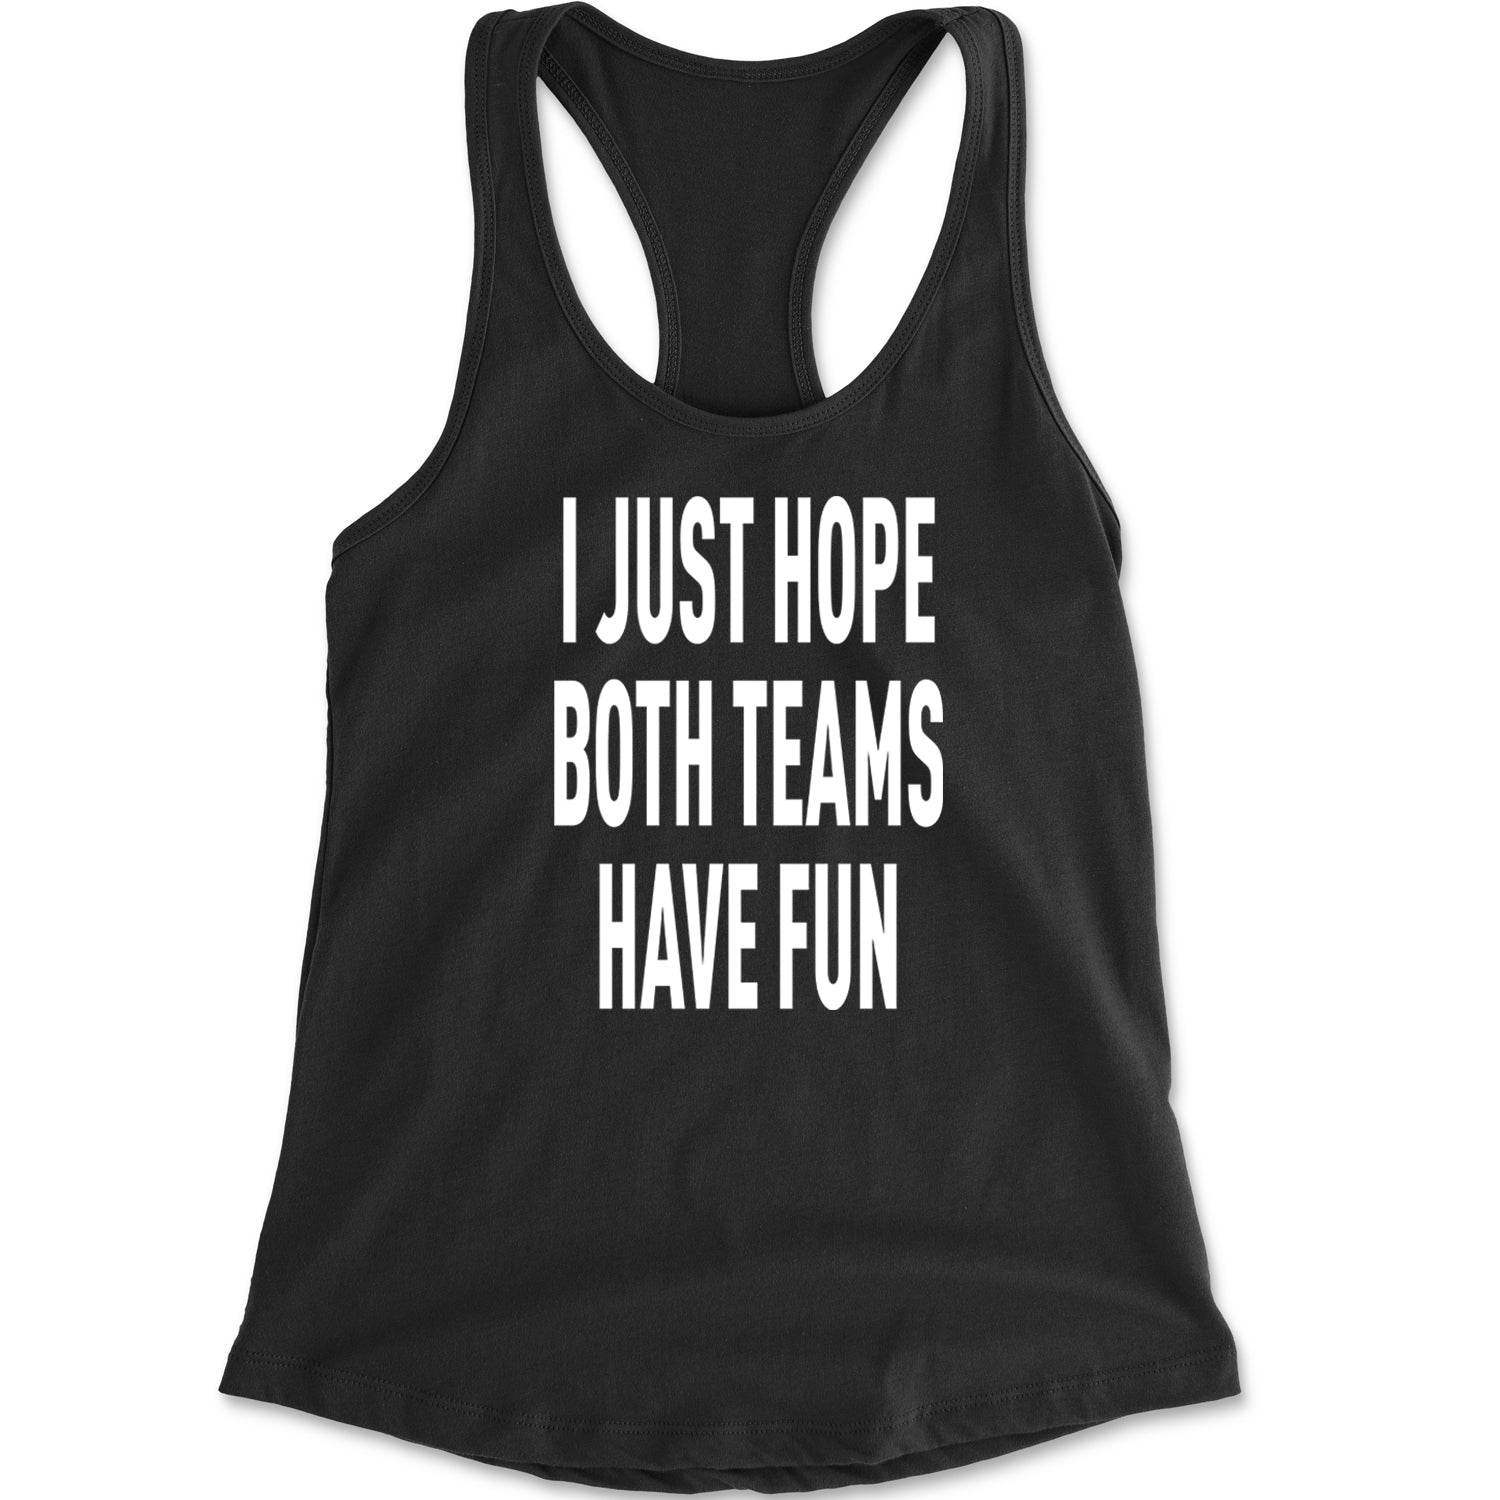 I Just Hope Both Teams Have Fun Sports Racerback Tank Top for Women